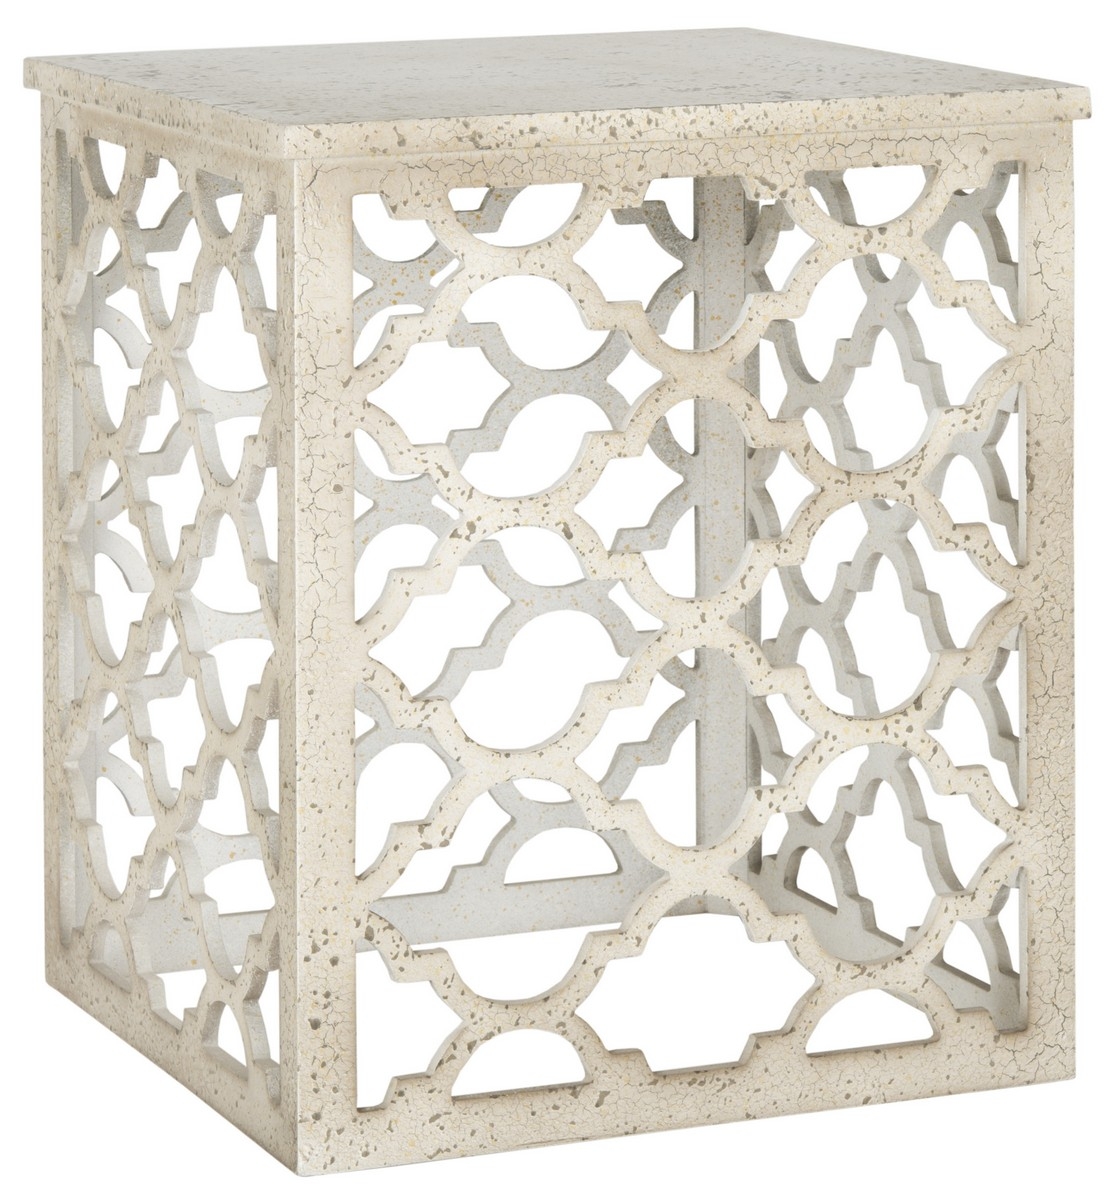 Lonny End Table - Distressed White - Safavieh - Image 1